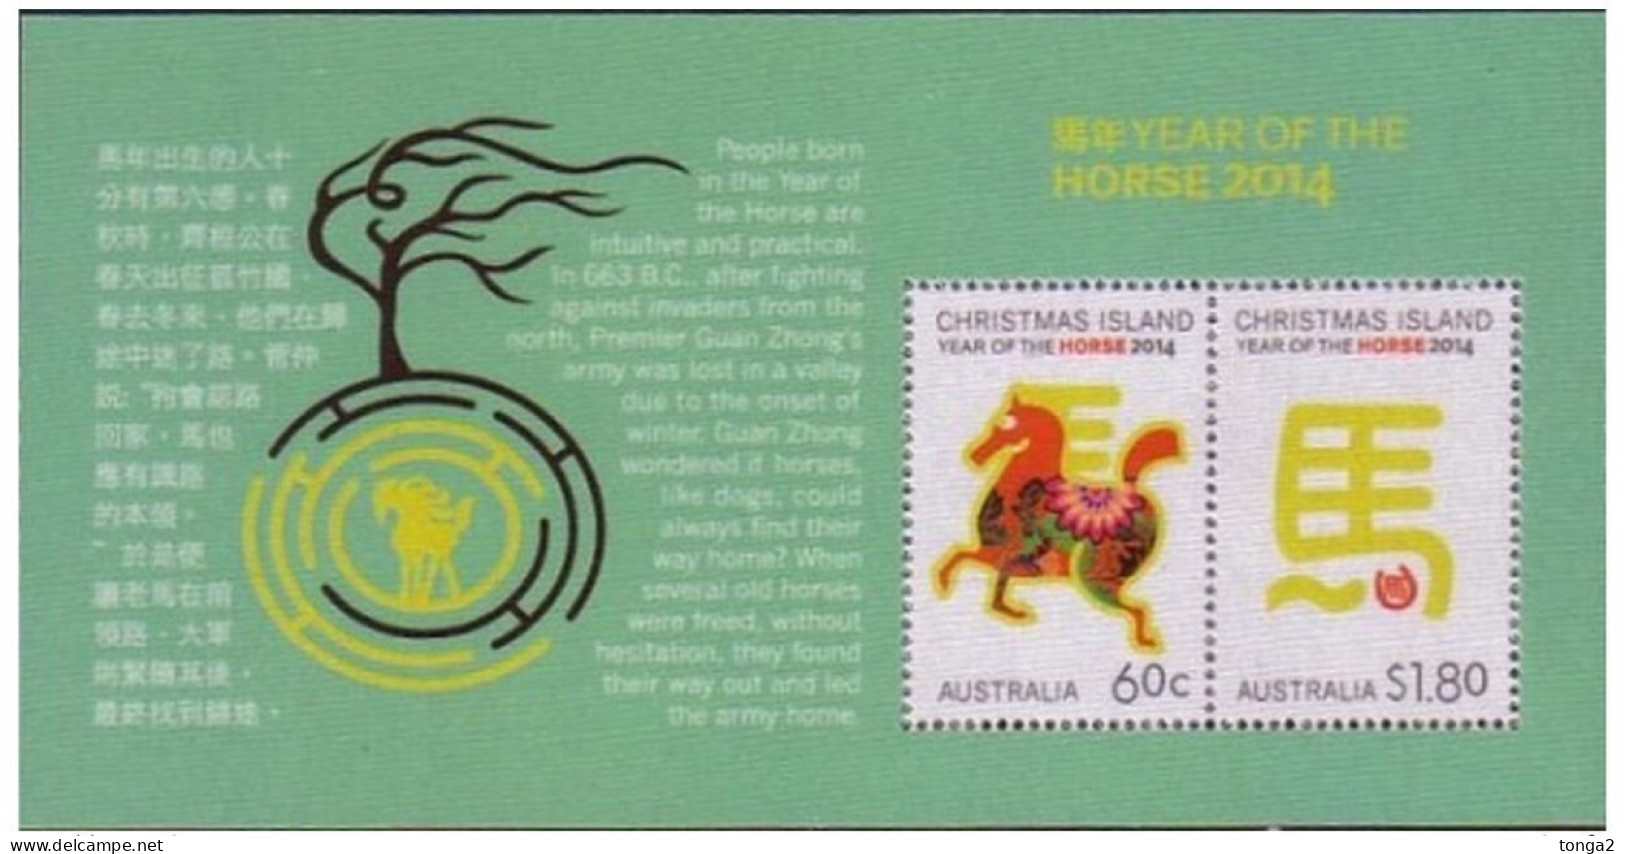 Australia 2014 Year Of The Horse S/S Printed On SILK - Unusual - Mint Stamps